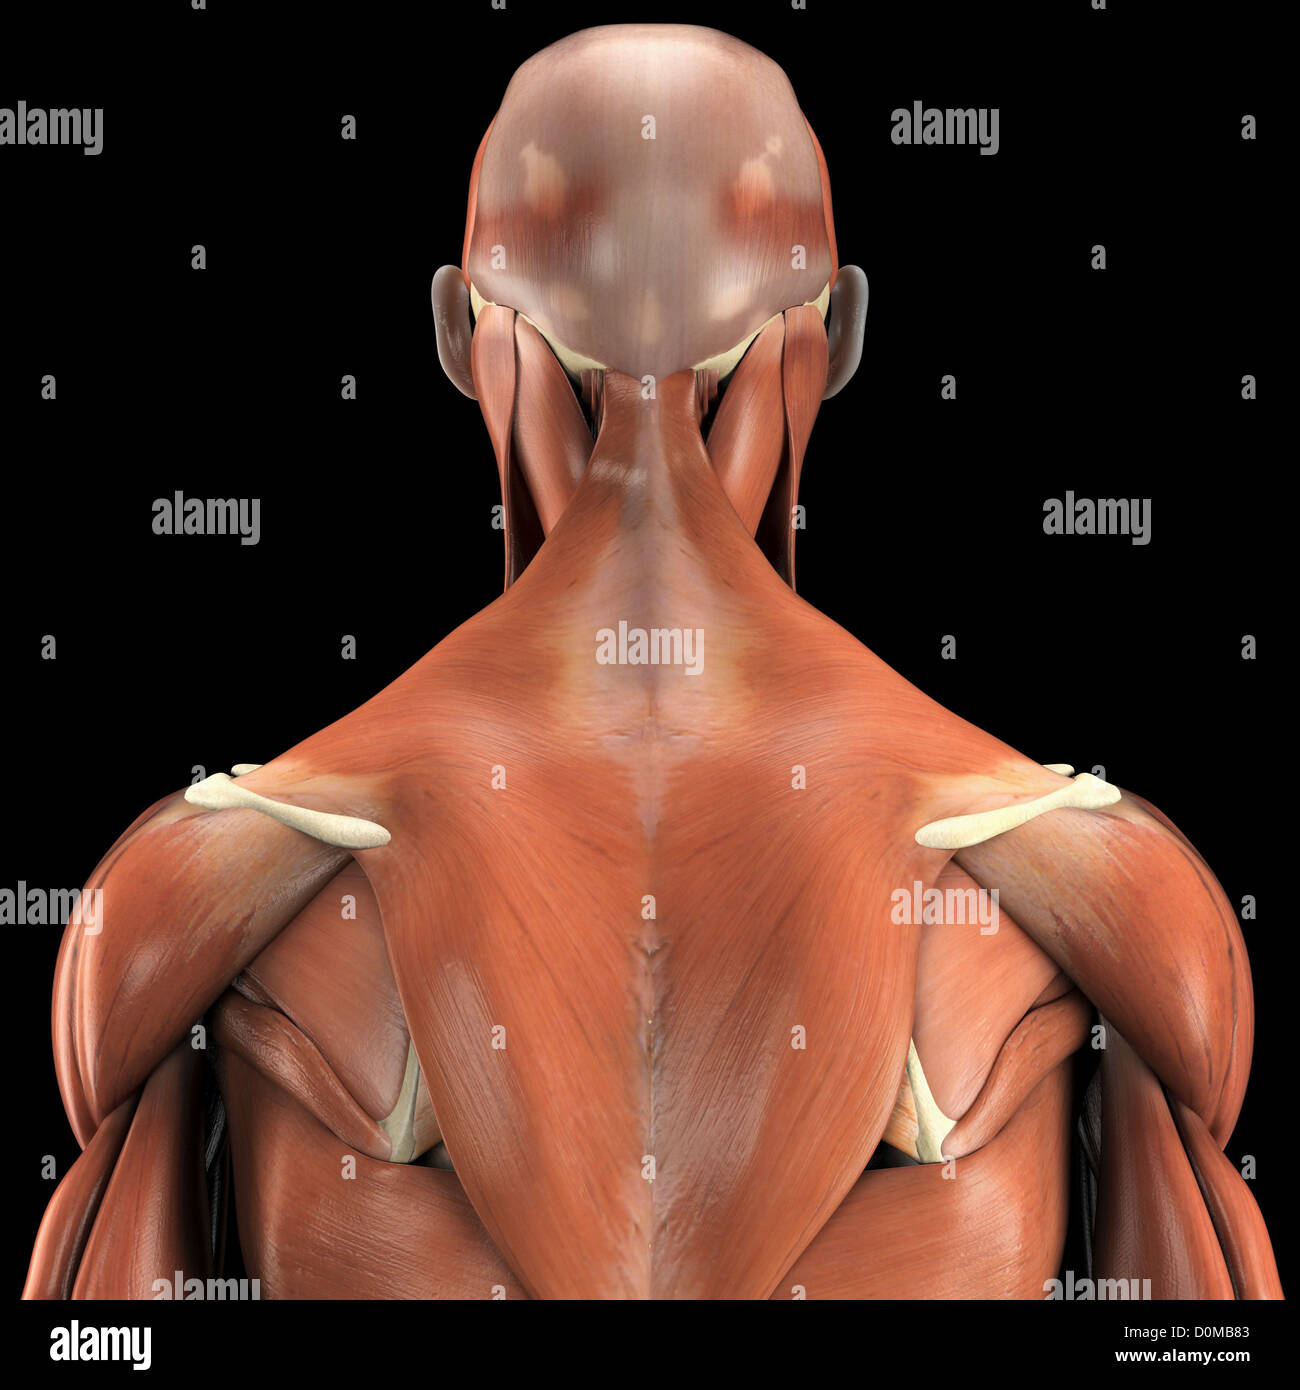 A human model showing the deltoid and trapezius as well as muscles in the neck and face. Stock Photo